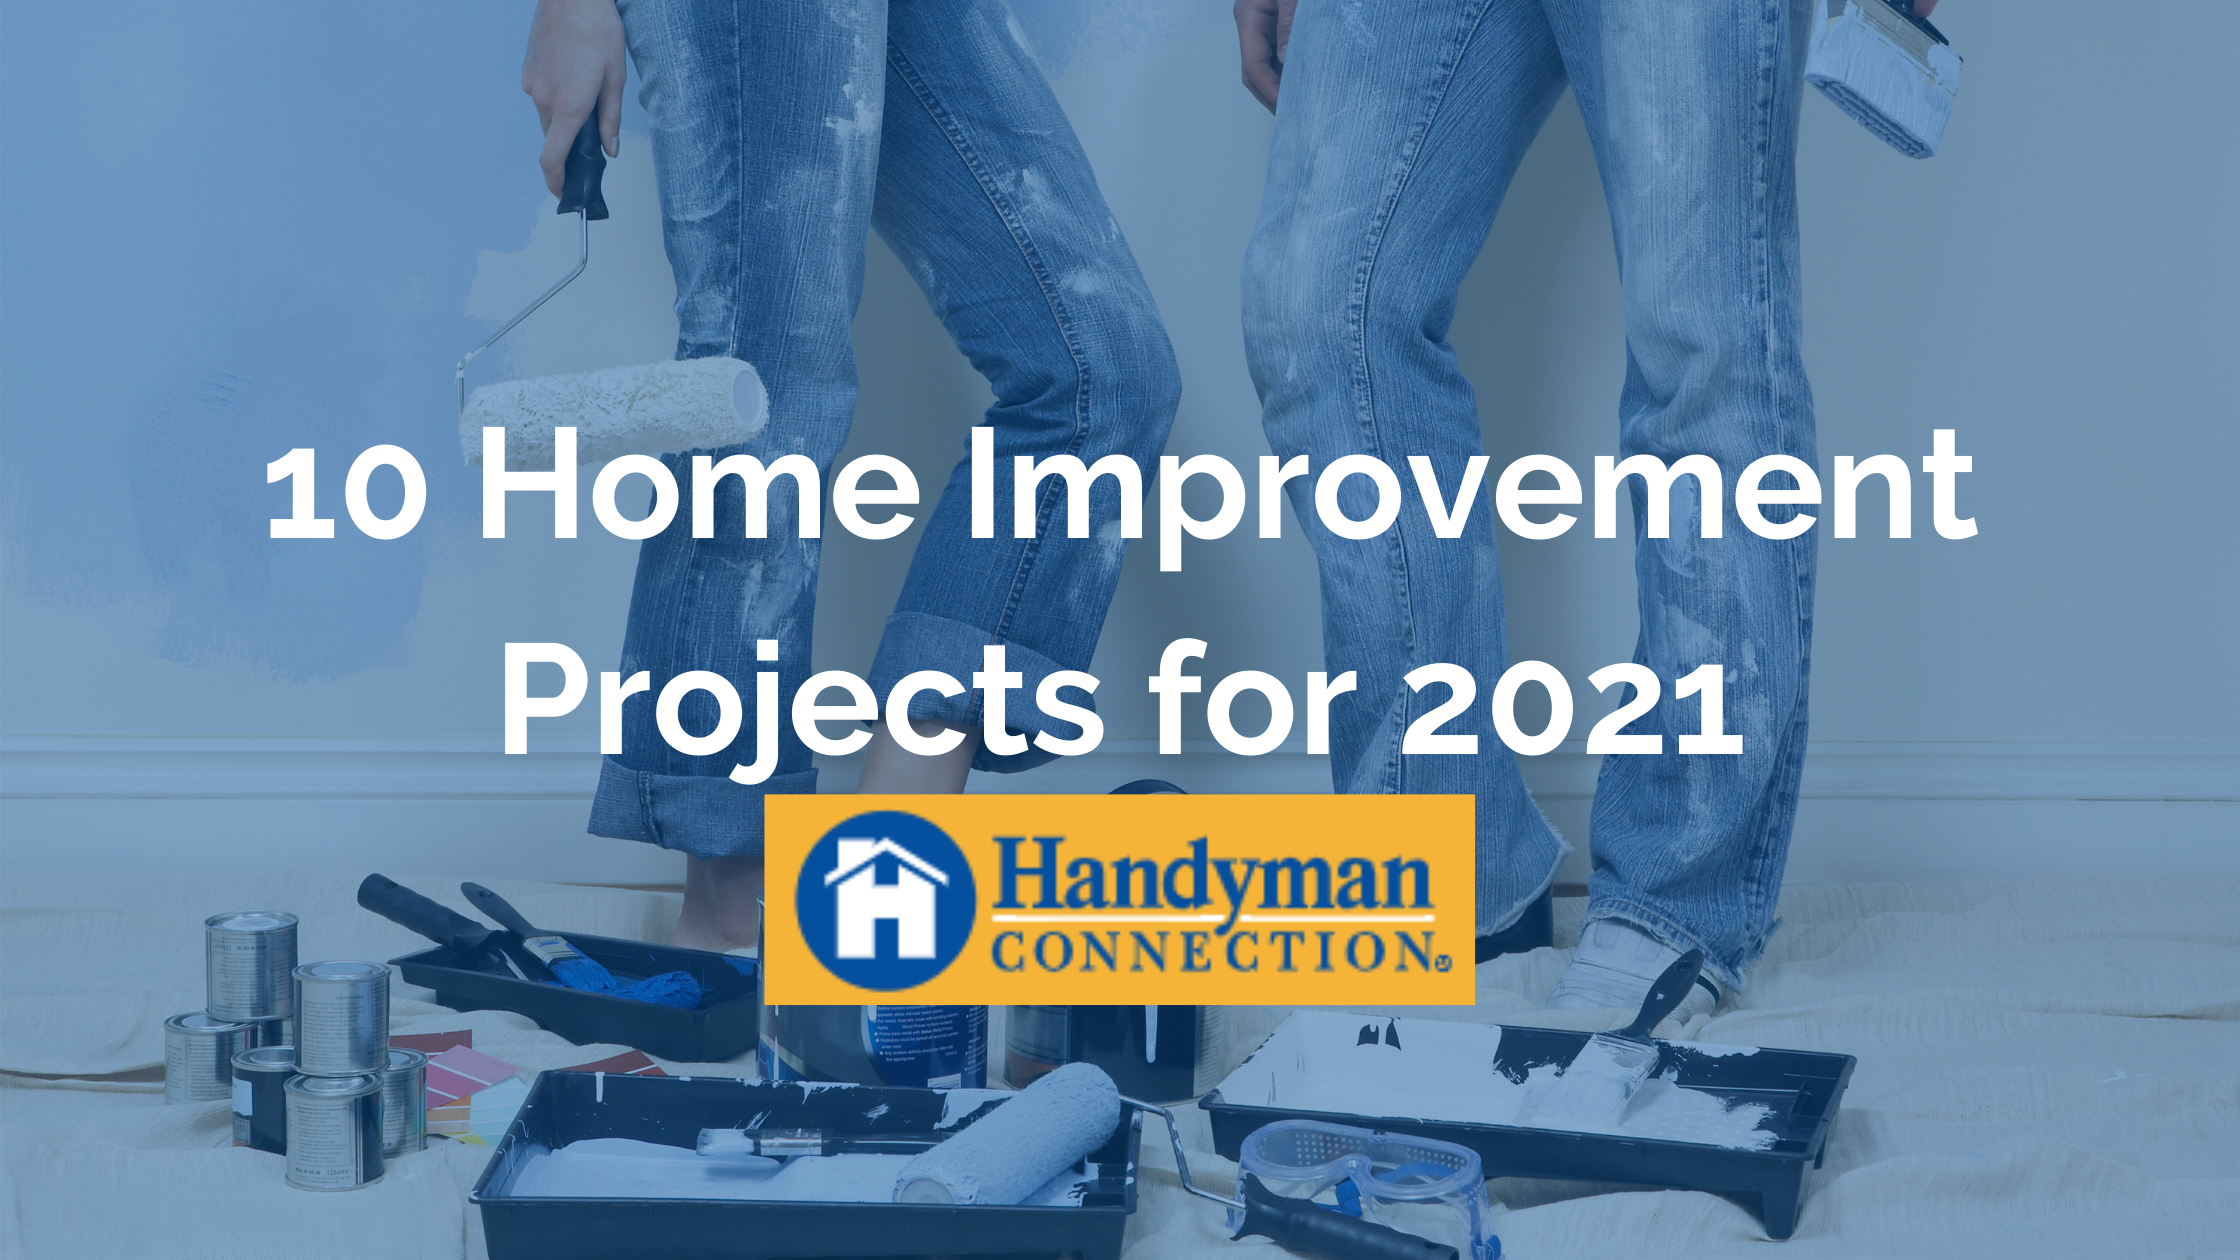 https://handymanconnection.com/wp-content/uploads/2021/05/10-Home-Improvement-Projects-for-2021.png